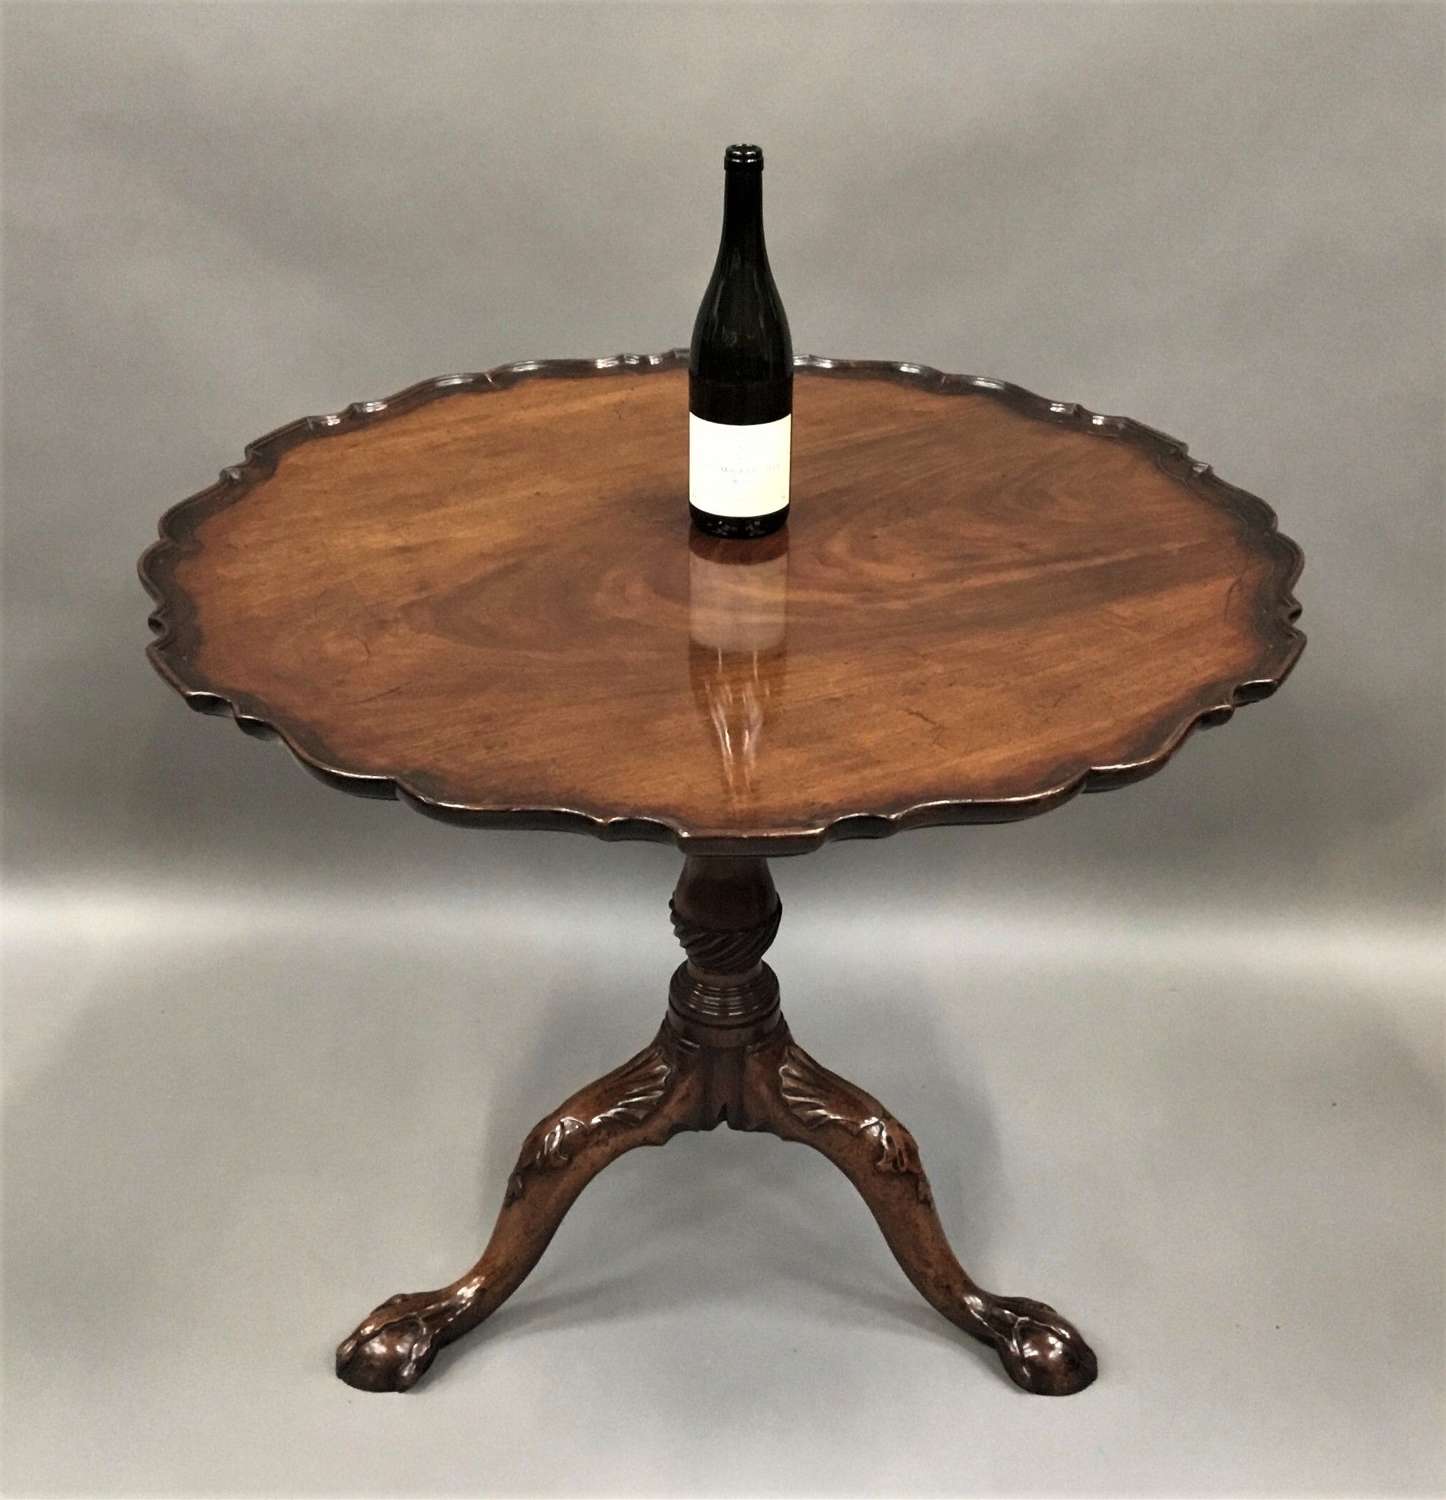 Exceptional George III mahogany piecrust tripod table / supper table